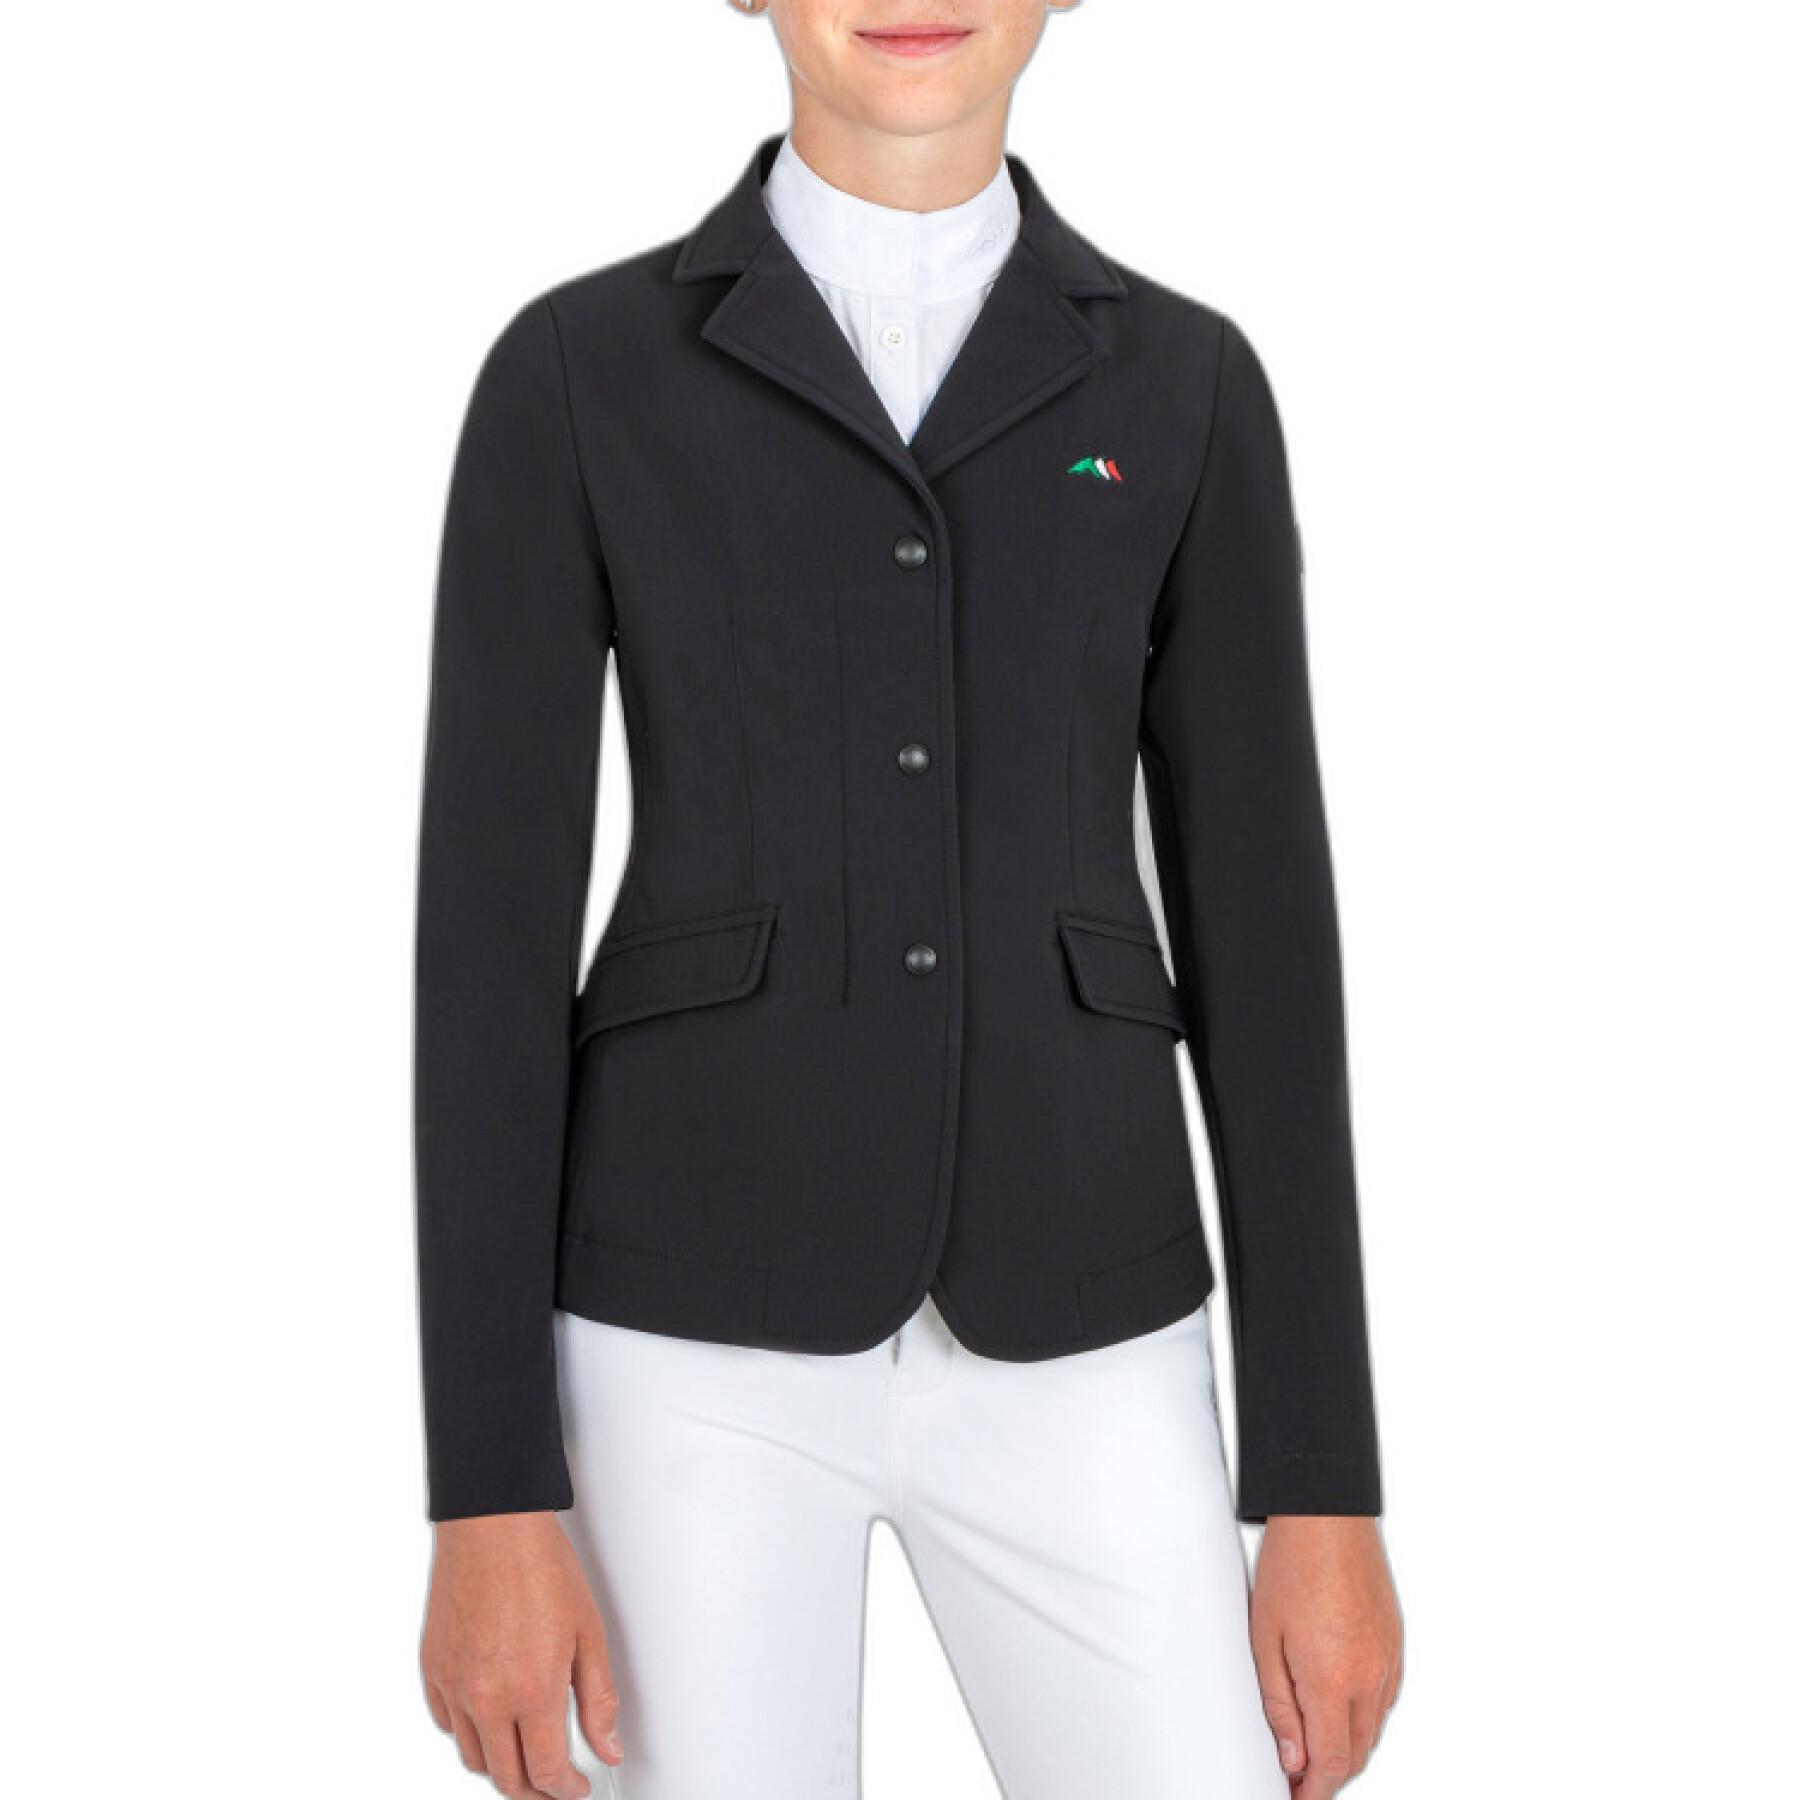 Riding jacket girl Equiline